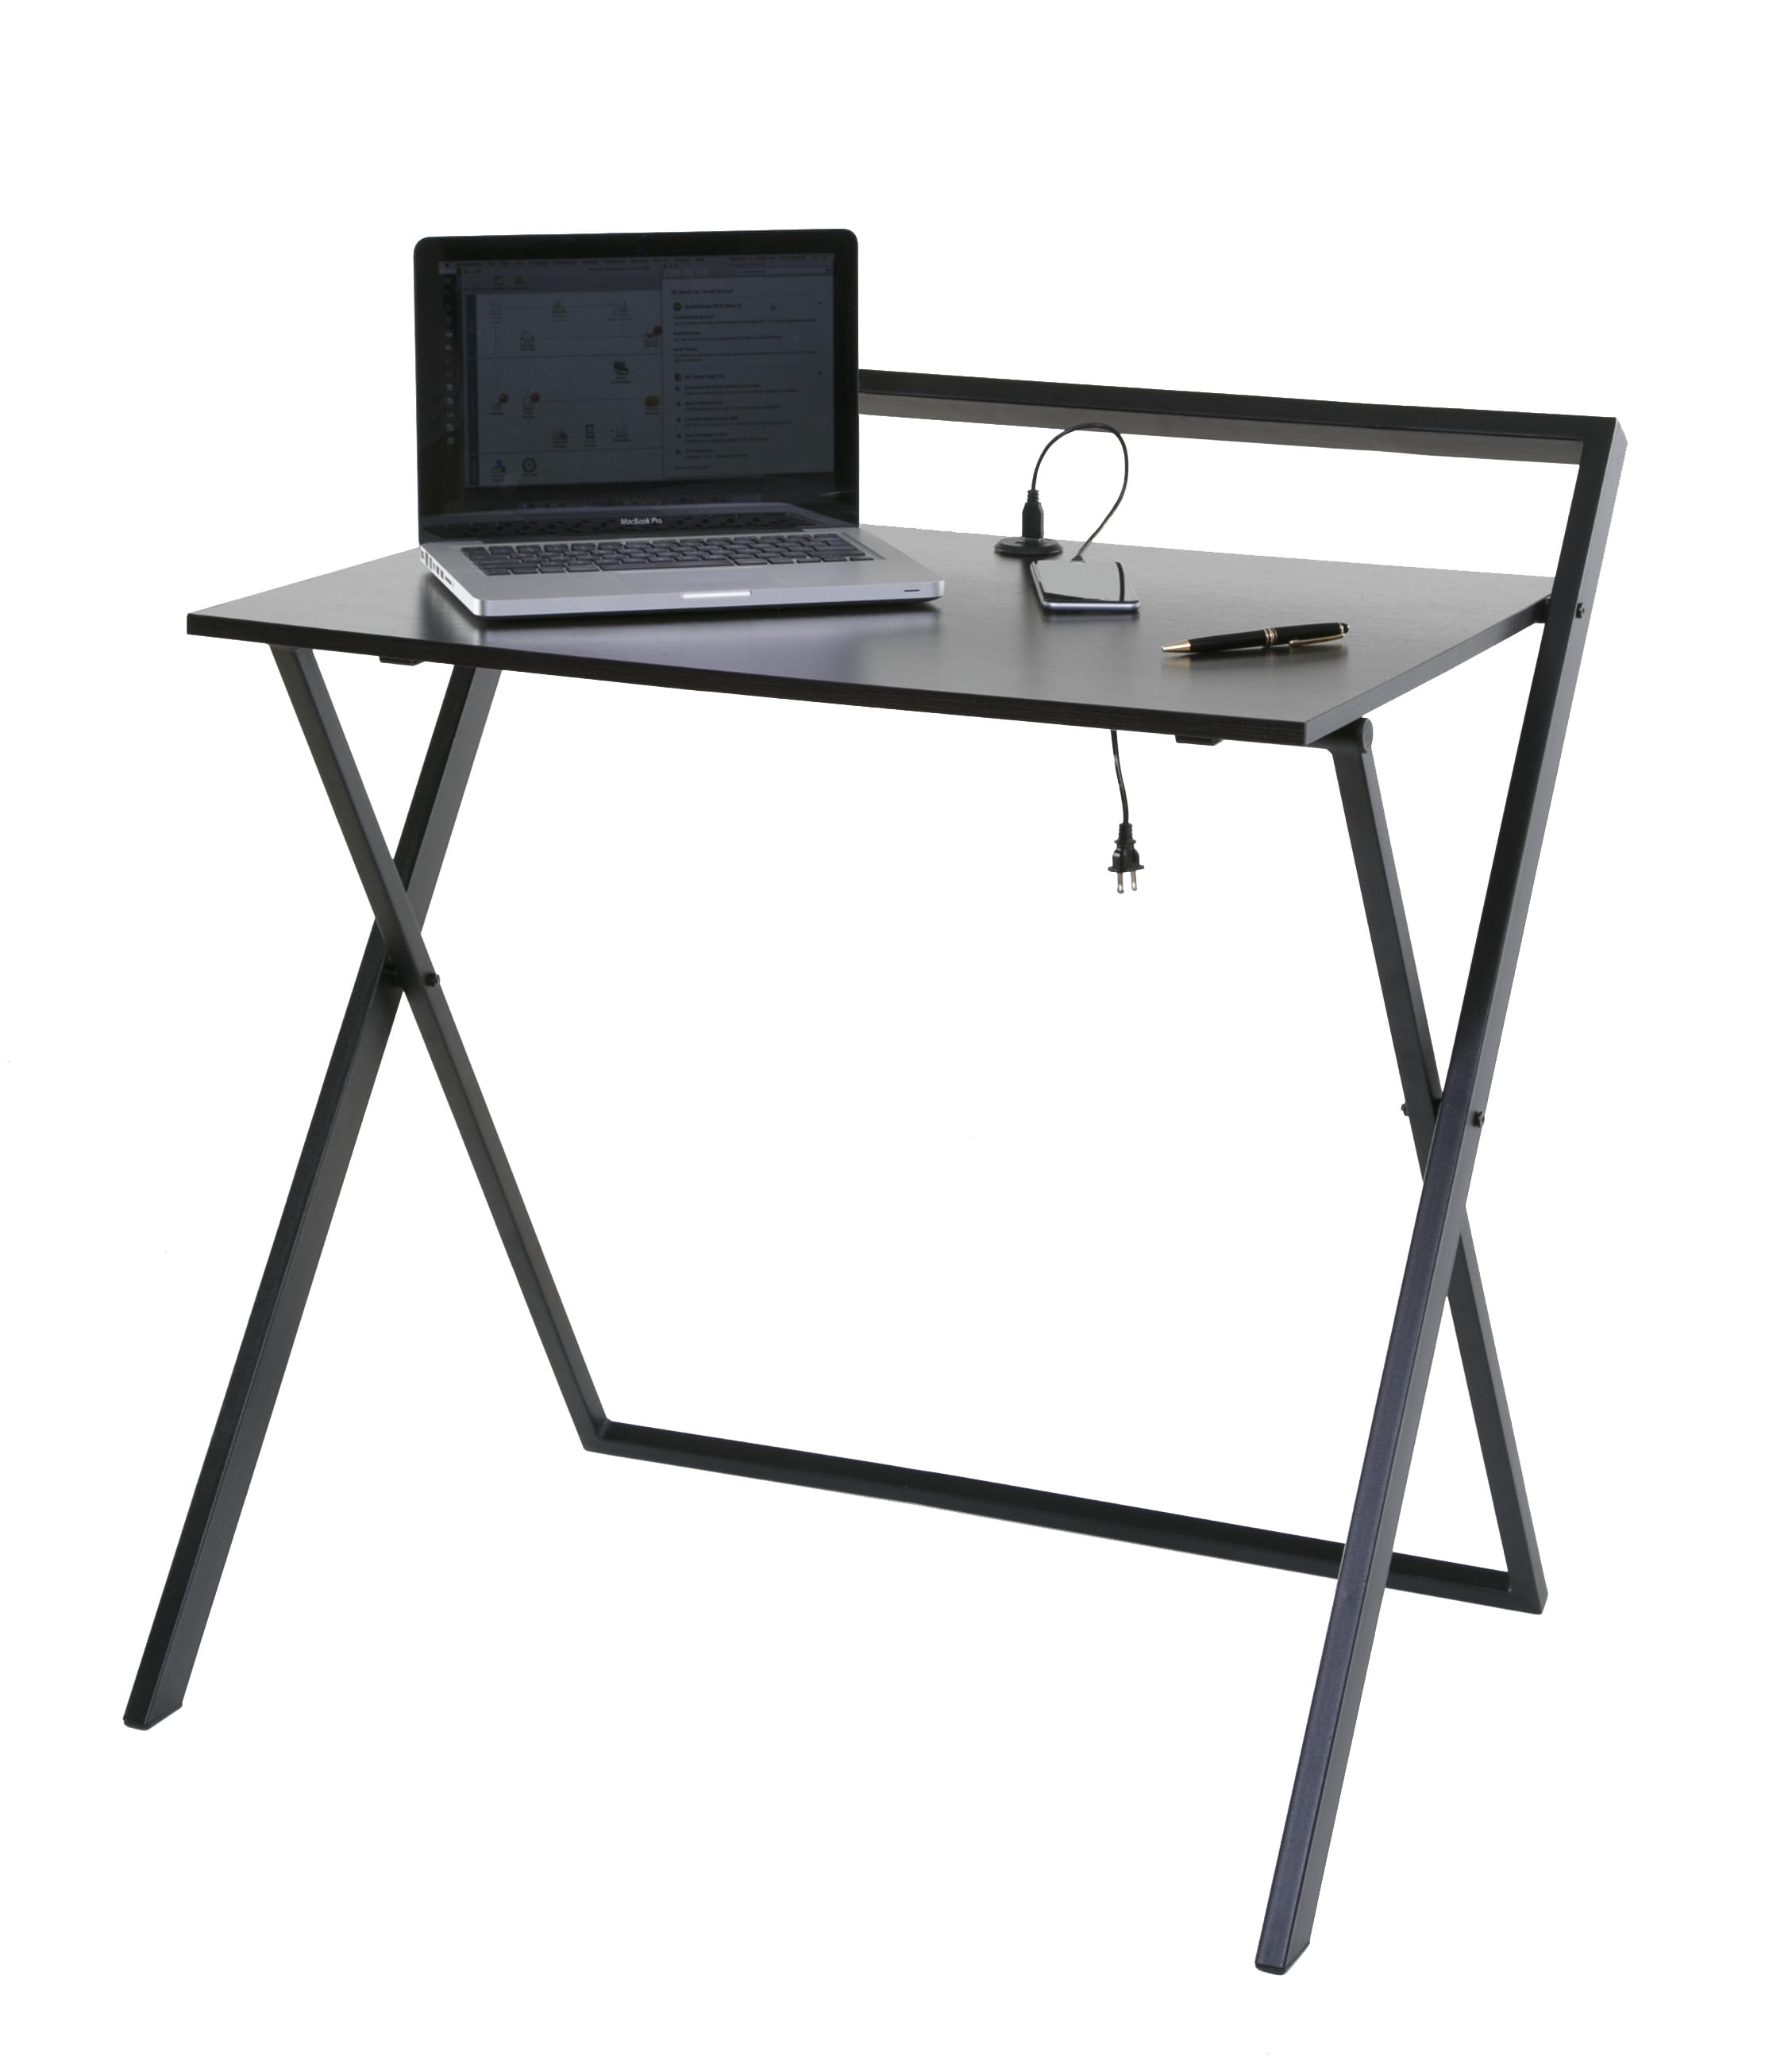 Comfort Products 50-1020qa05 34.75 X 32.25 X 24.5 In. No Assembly Required Desk With Dual Usb Charger, Black